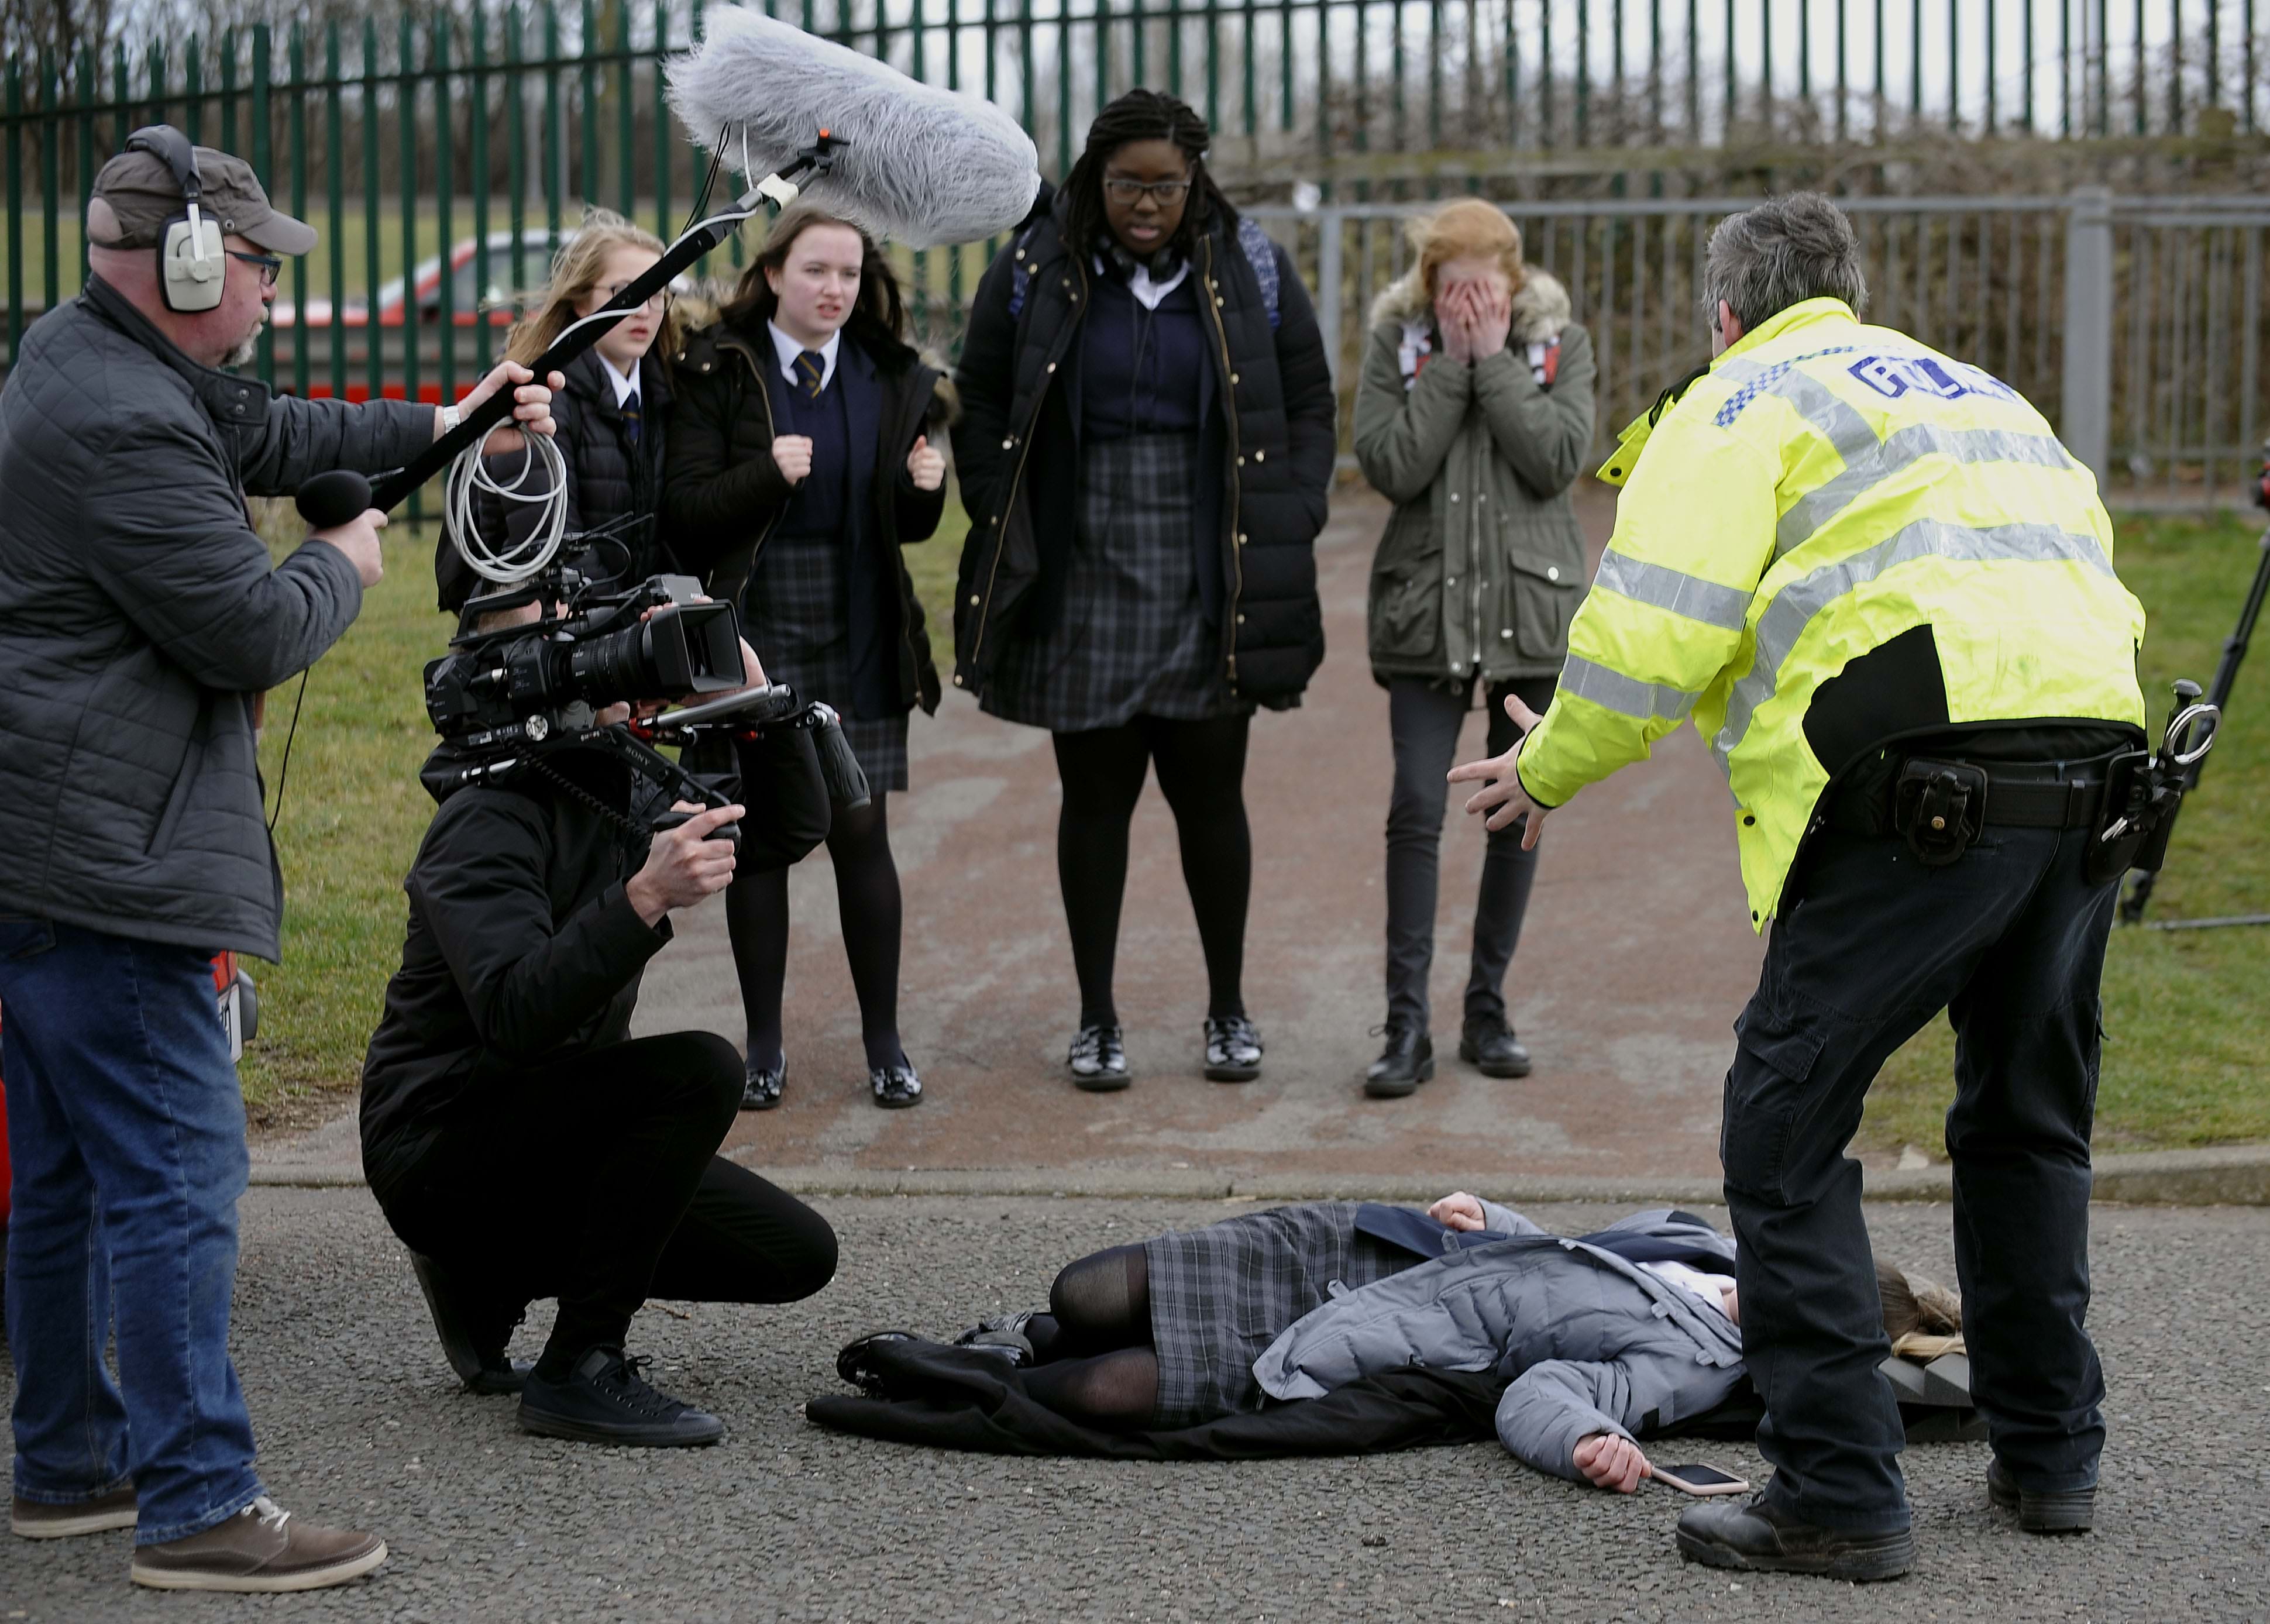 On the set of the road safety film 